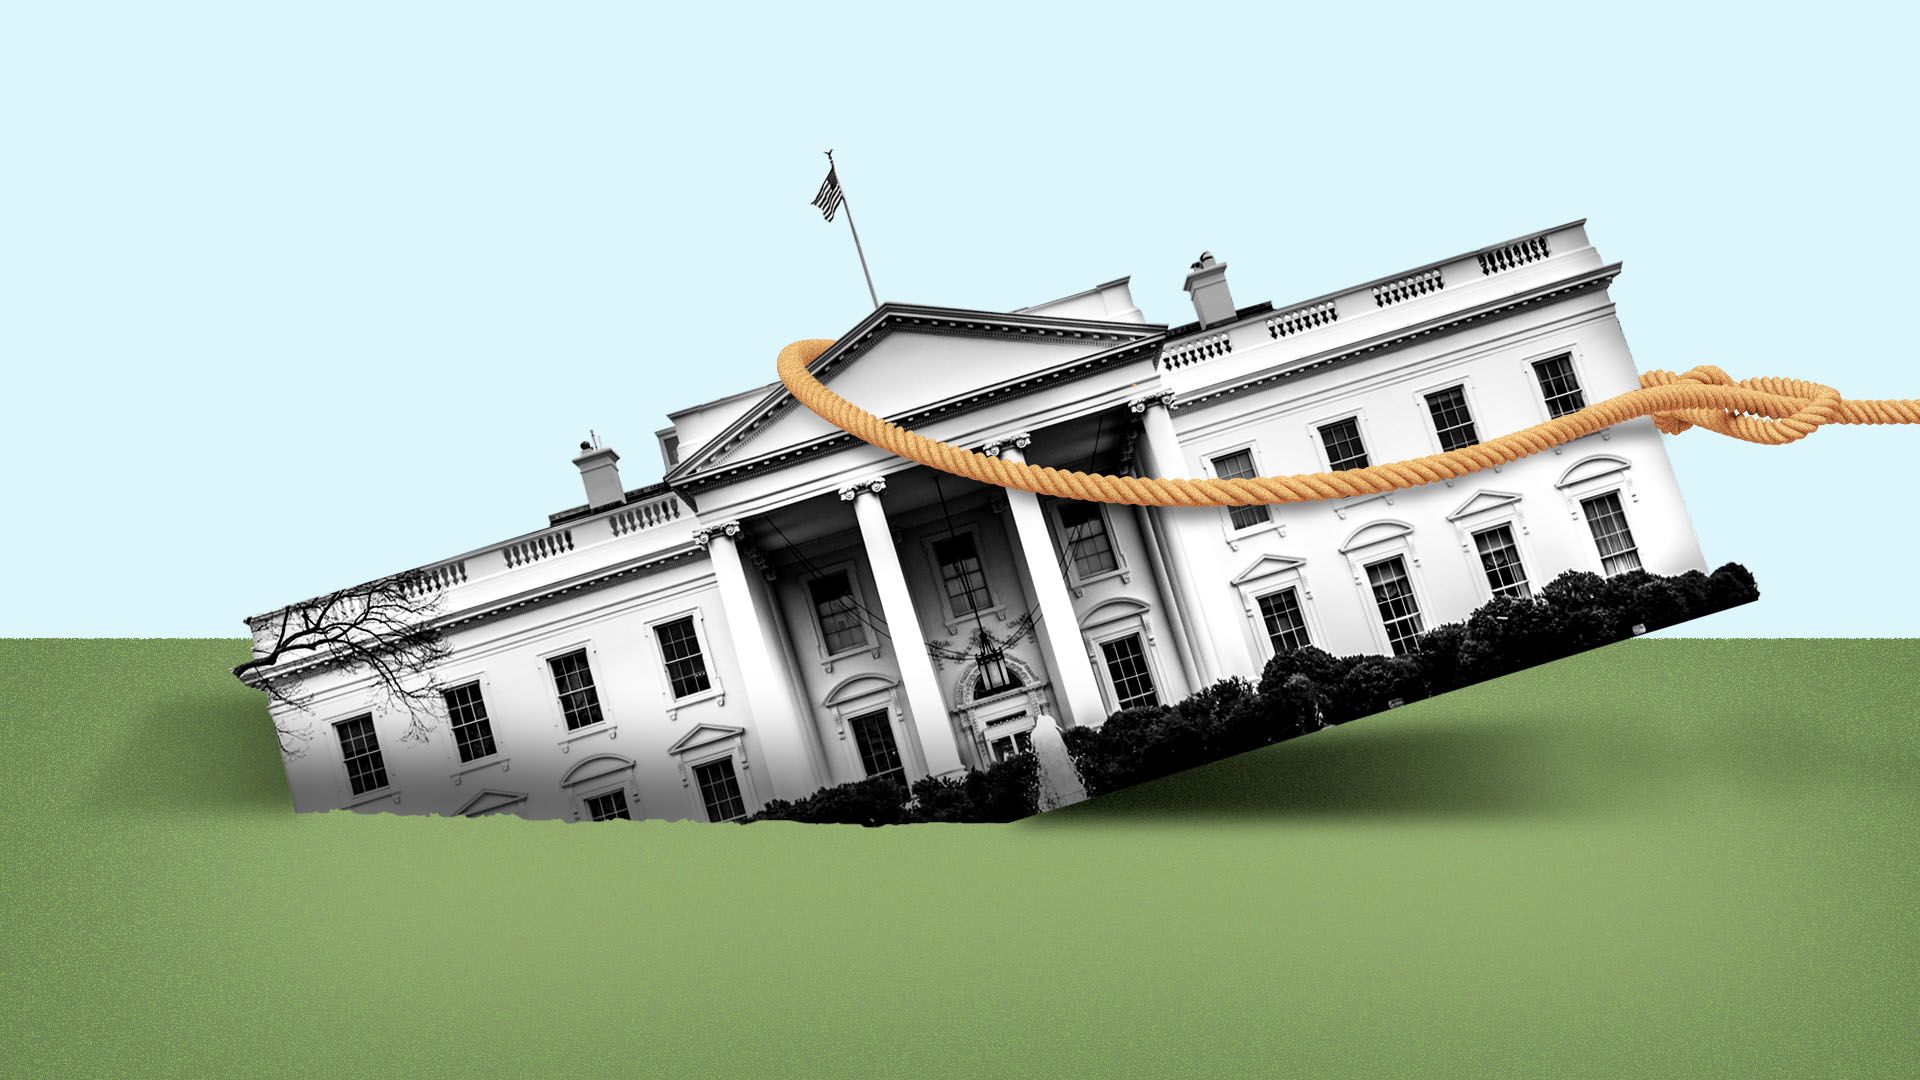 Illustration of the White House sinking into the ground, with a rope trying to pull it out